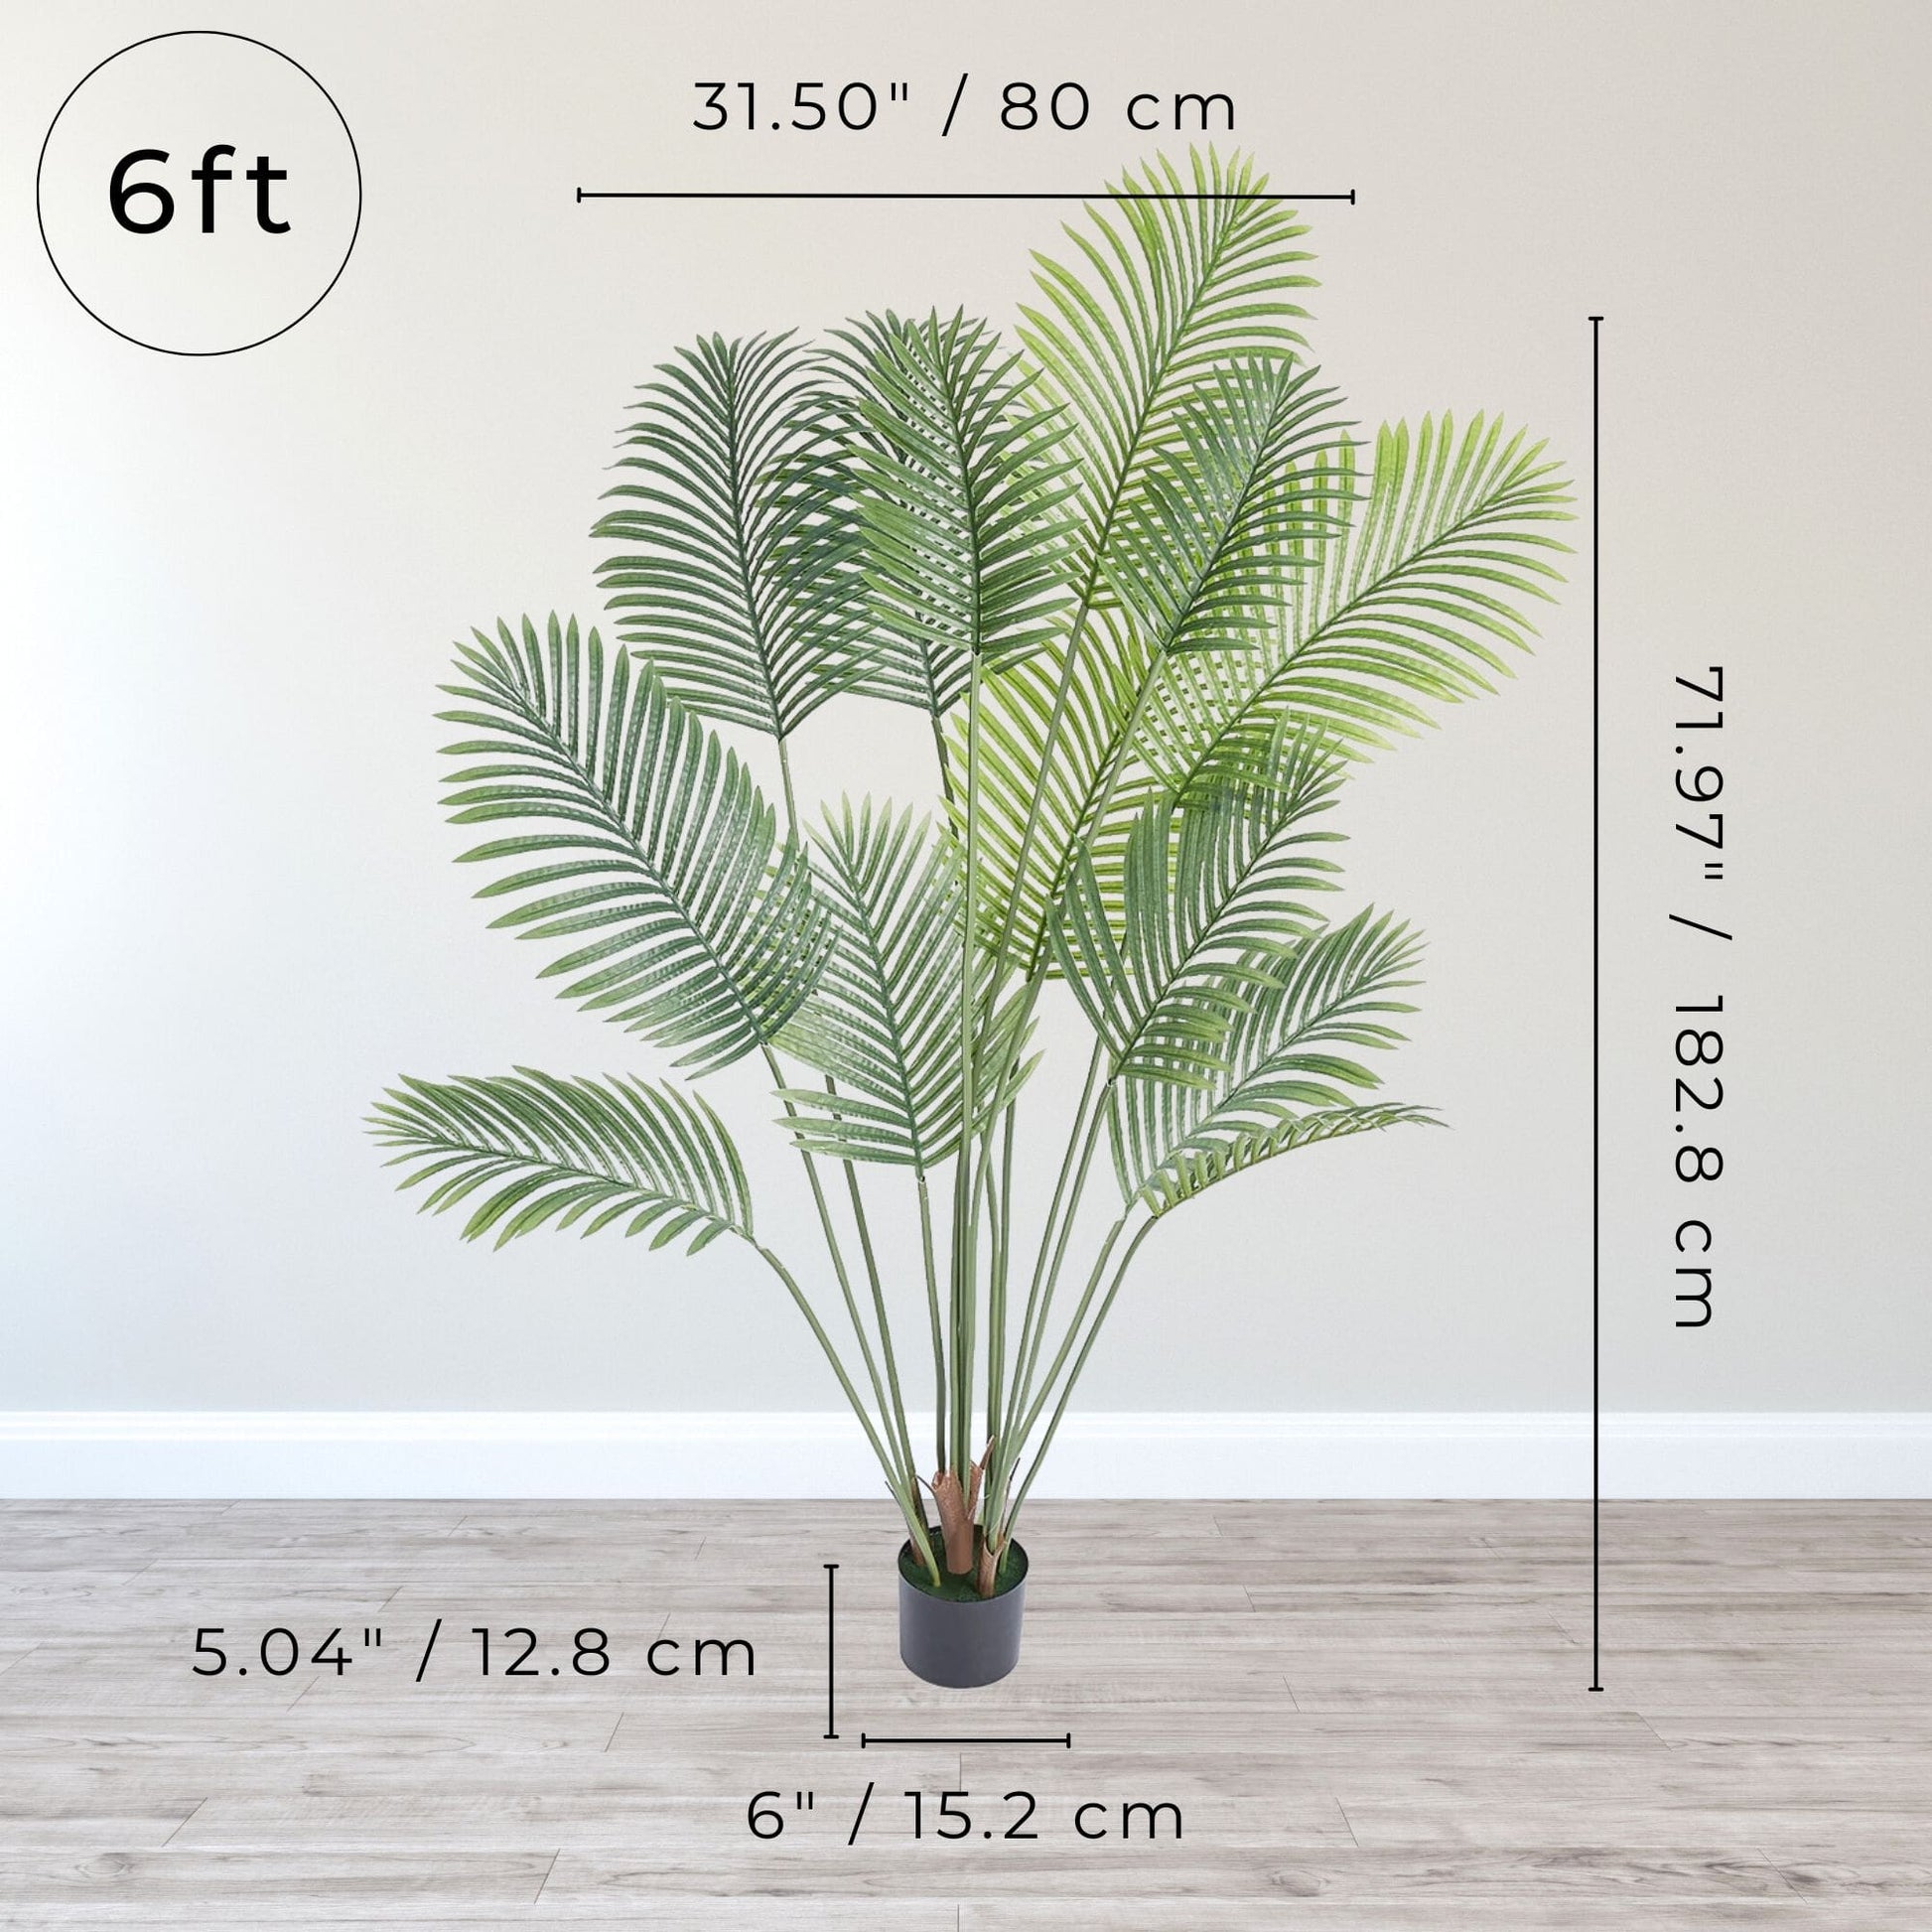 Elegant 6-foot artificial palm tree that enhances indoor and outdoor decor with its tall, majestic presence